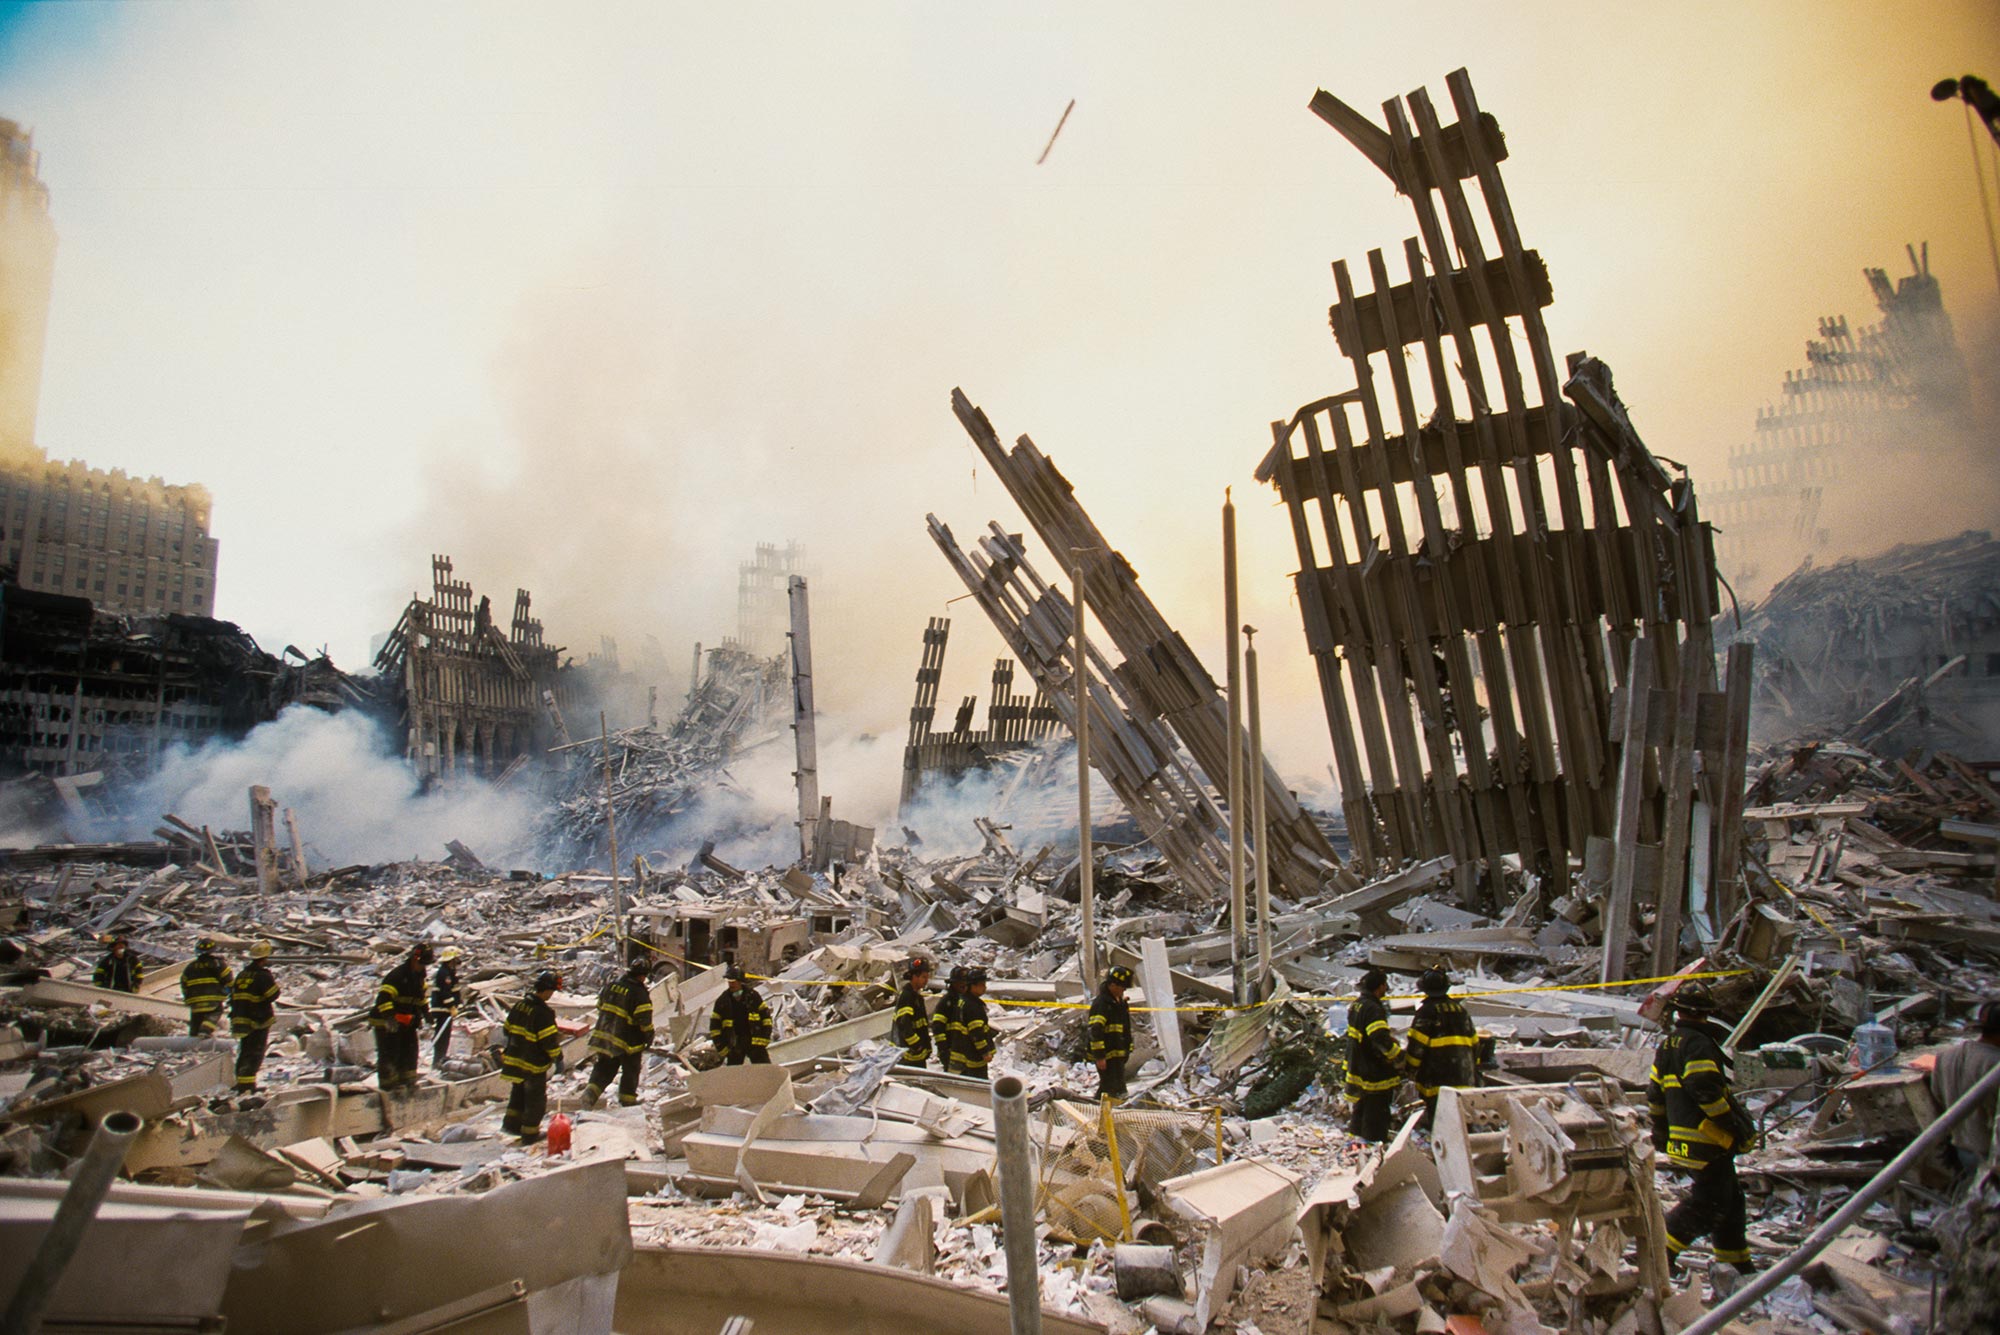  9/11 Memorial Exhibit: How Sports Healed the Nation